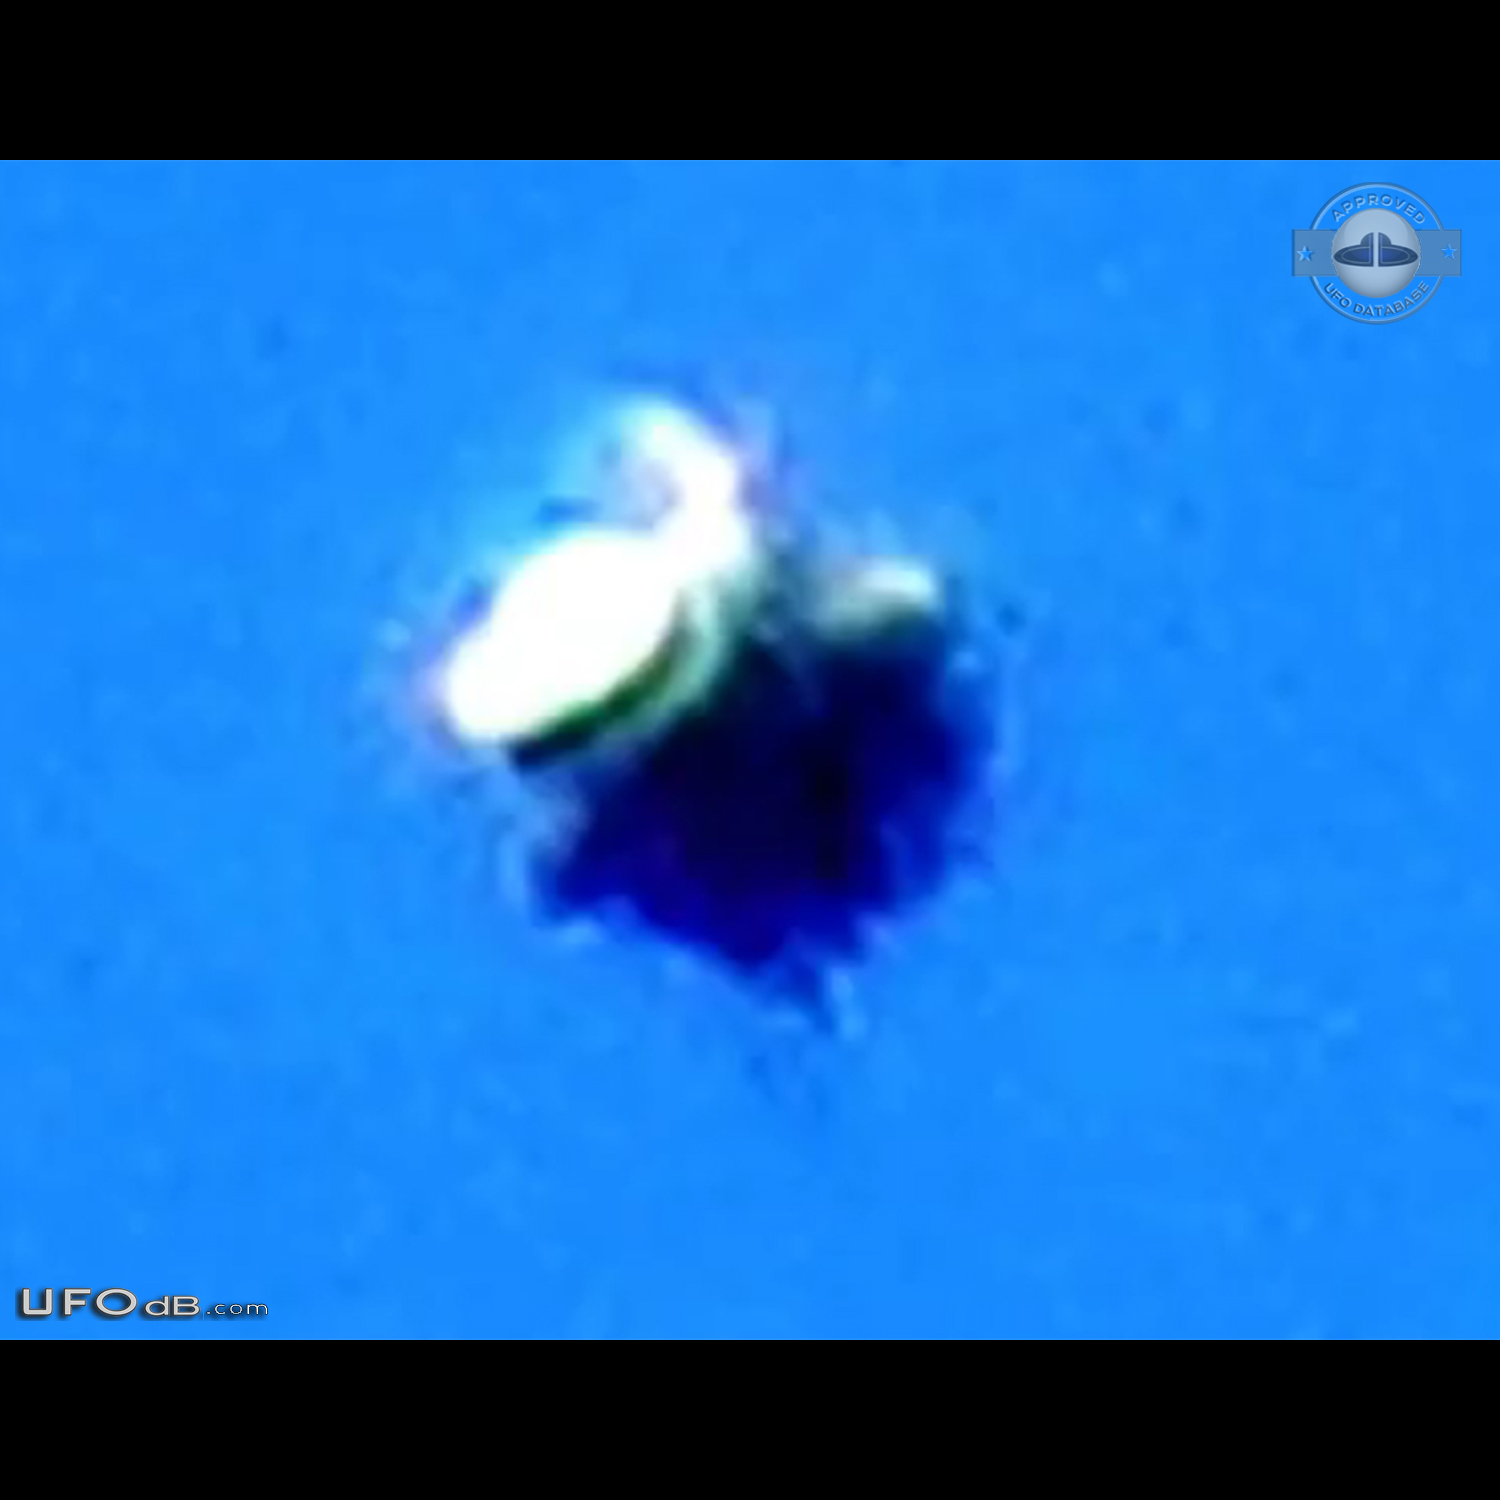 Jerky and strange UFO seen in Scarborough, Ontario canada 2015 UFO Picture #685-7